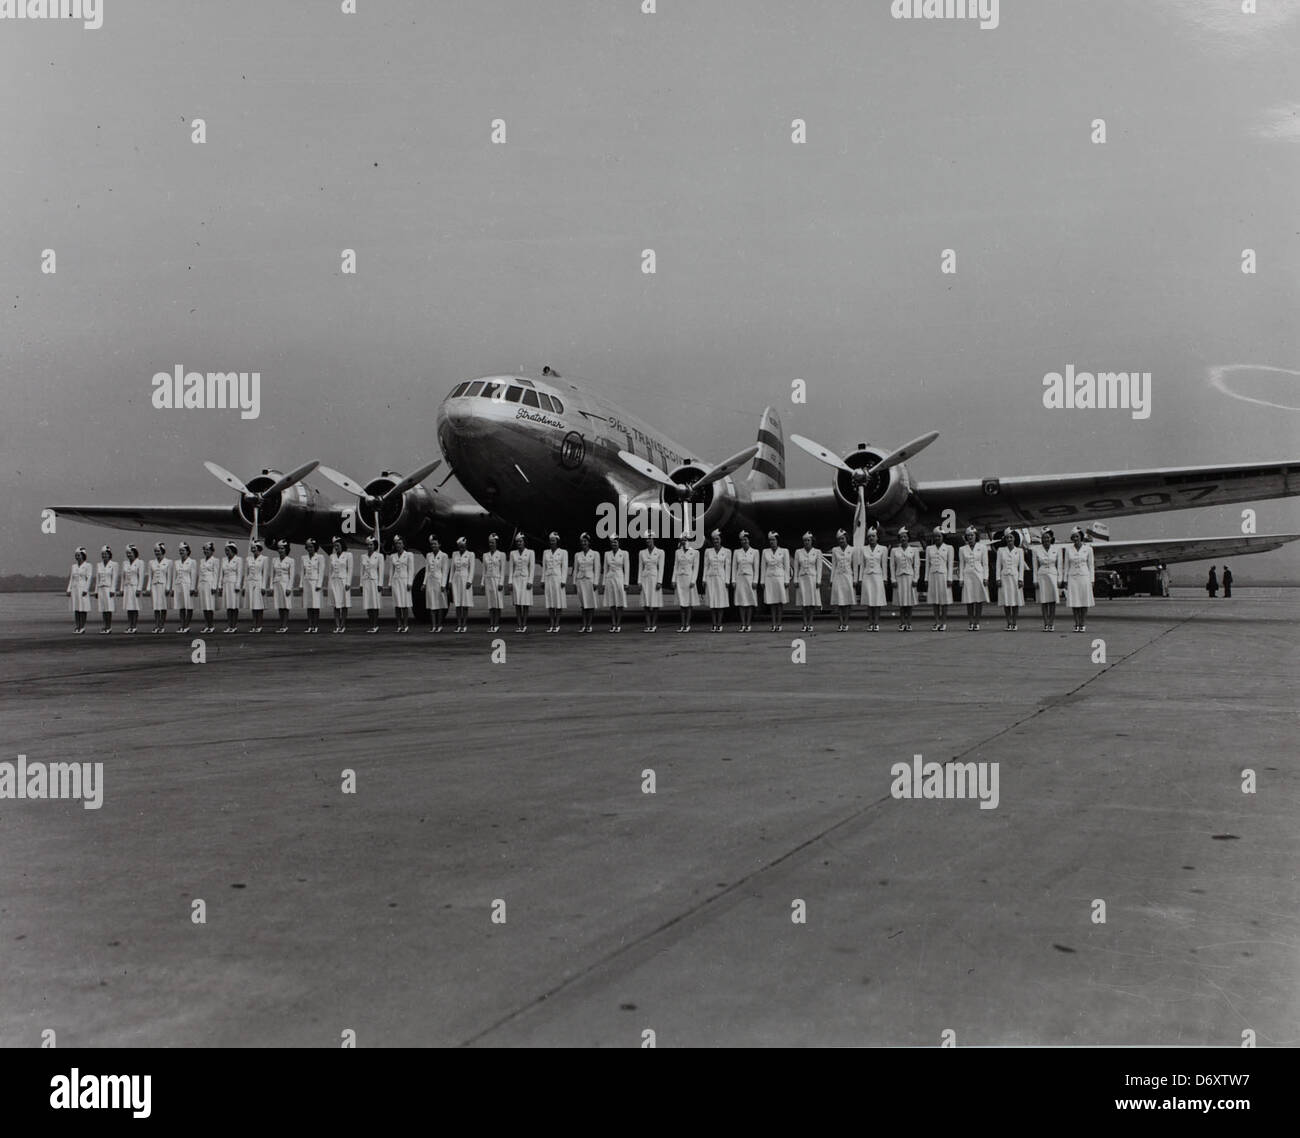 Stewardess in front of Stratoliner Stock Photo - Alamy